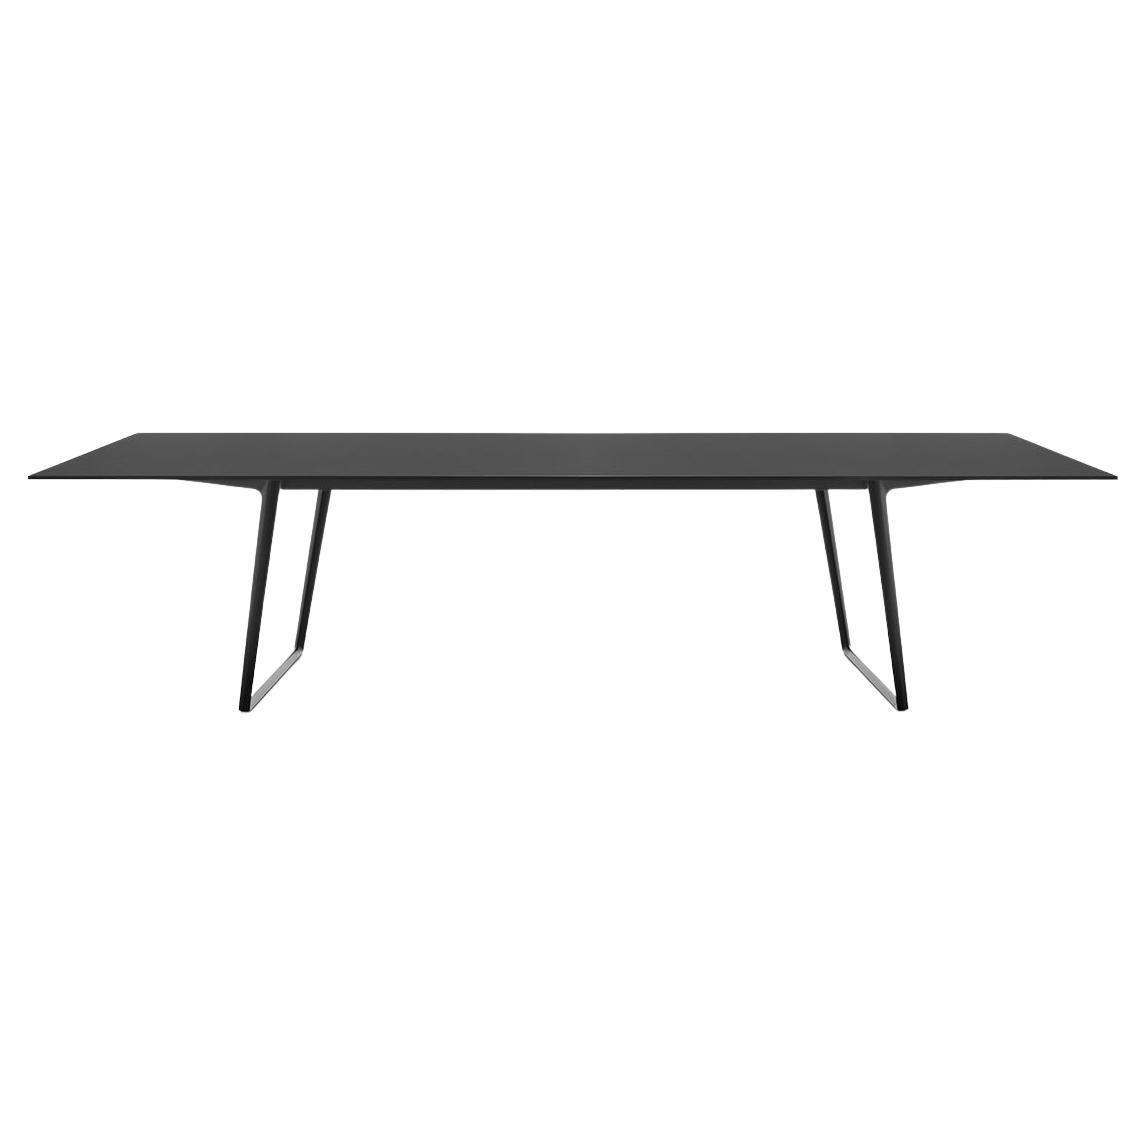 MDF Italia Customizable Indoor or Outdoor Axy Table by Claudio Bellini For Sale